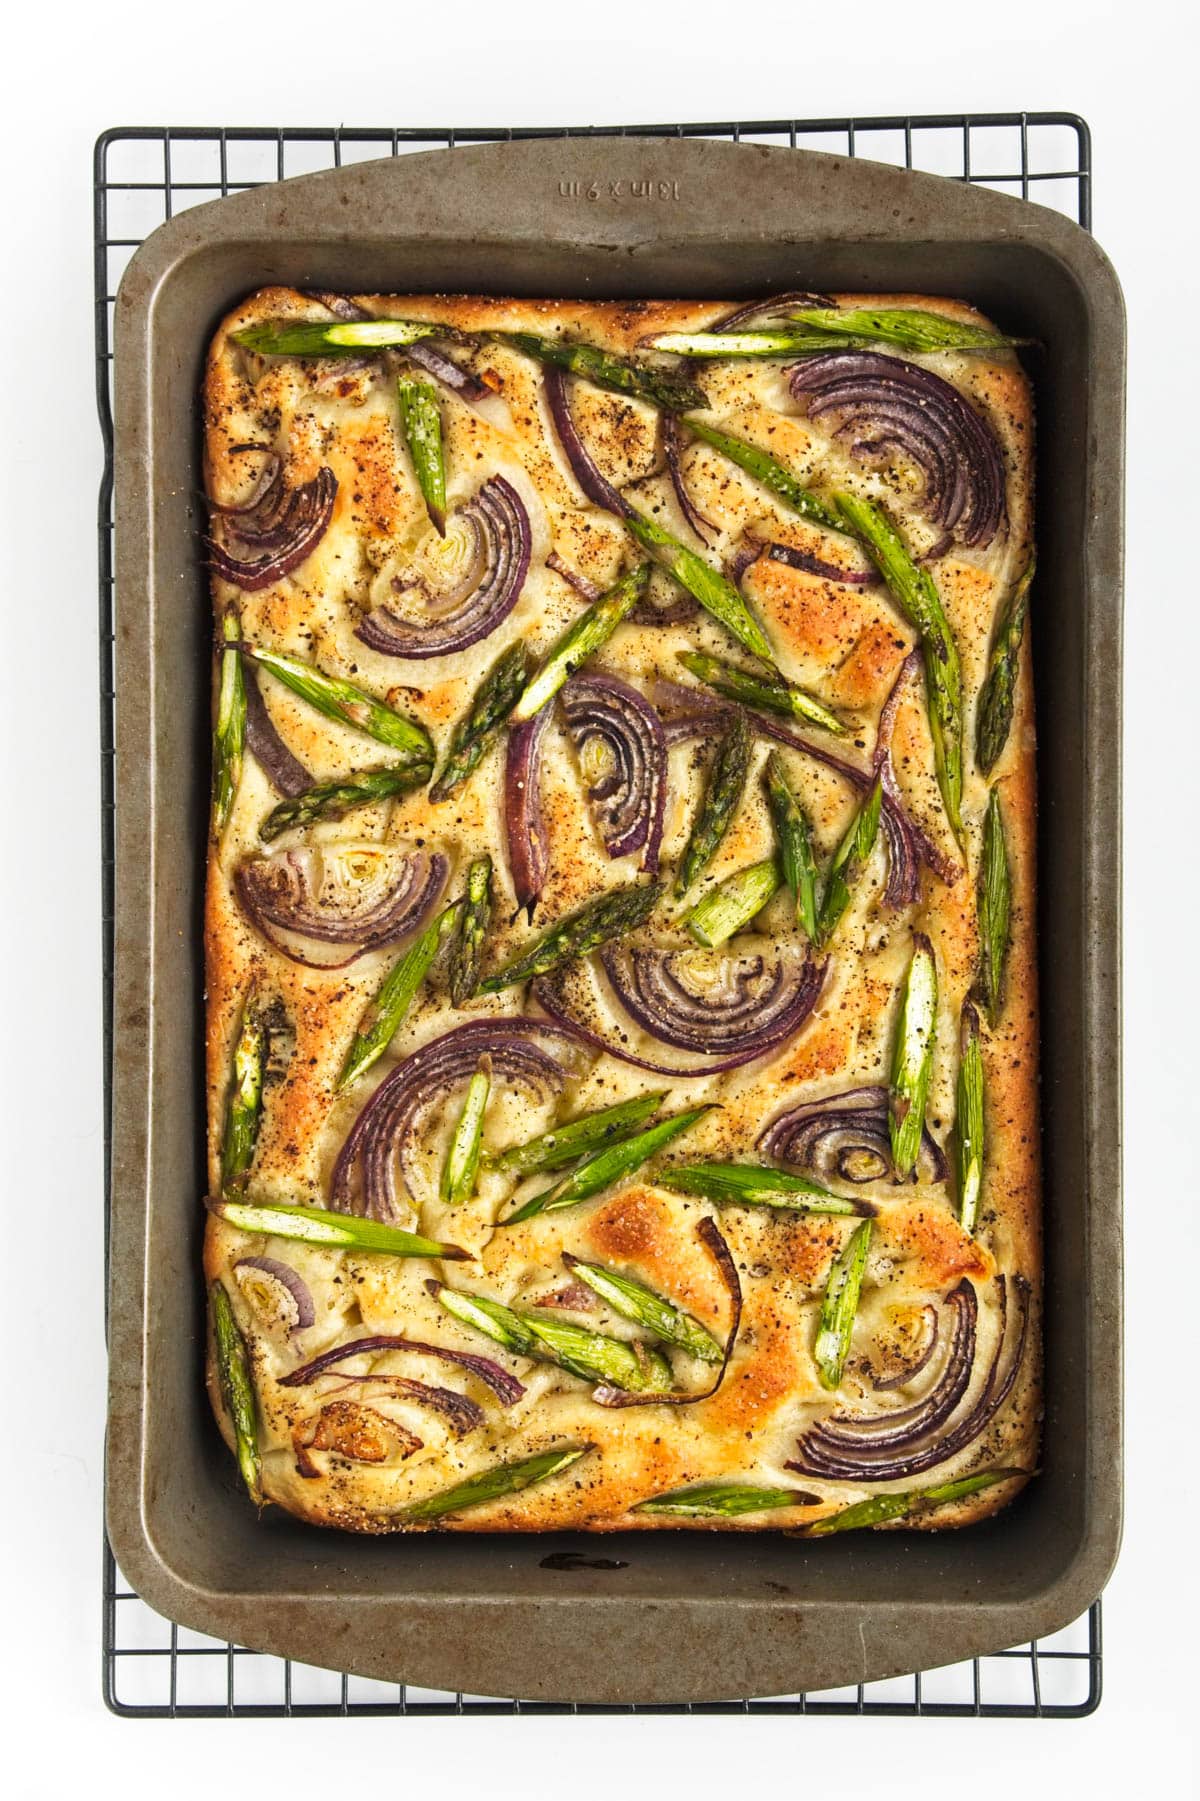 Baked bread with onion and asparagus in a baking pan.